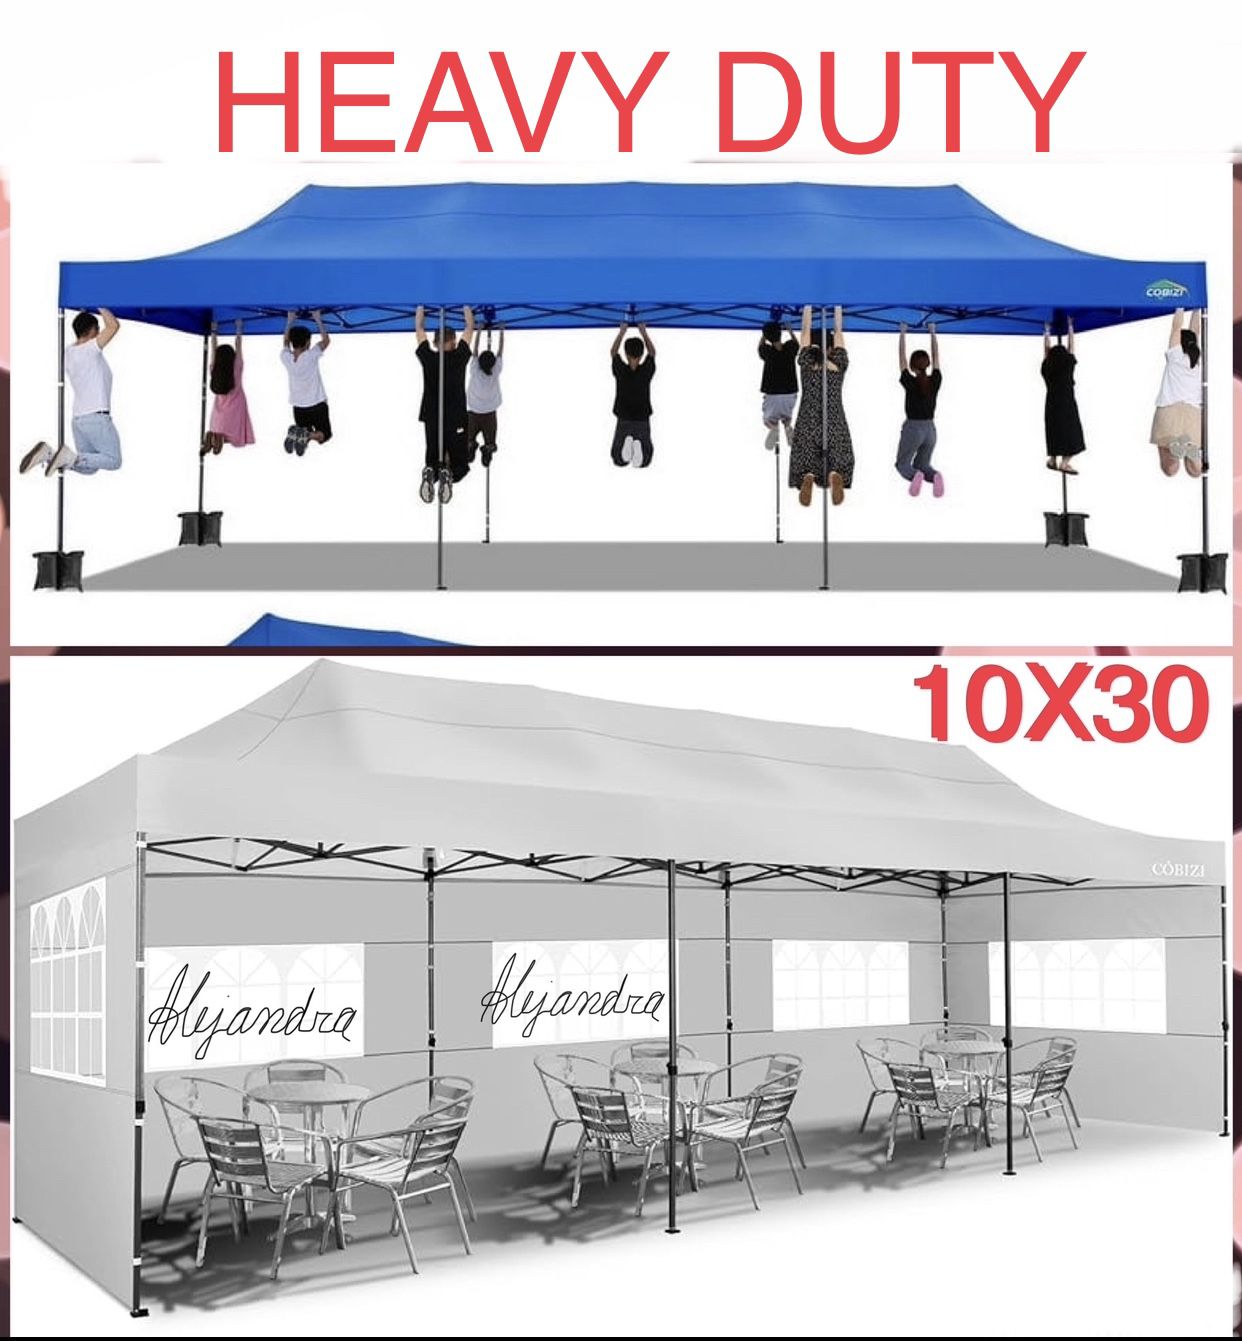 10x30 Pop Up Canopy with 8 Sidewall,Heavy Duty Canopy UPF 50+ All Season Wind Waterproof Commercial Outdoor Wedding Party Tents for Parties Canopy Gaz